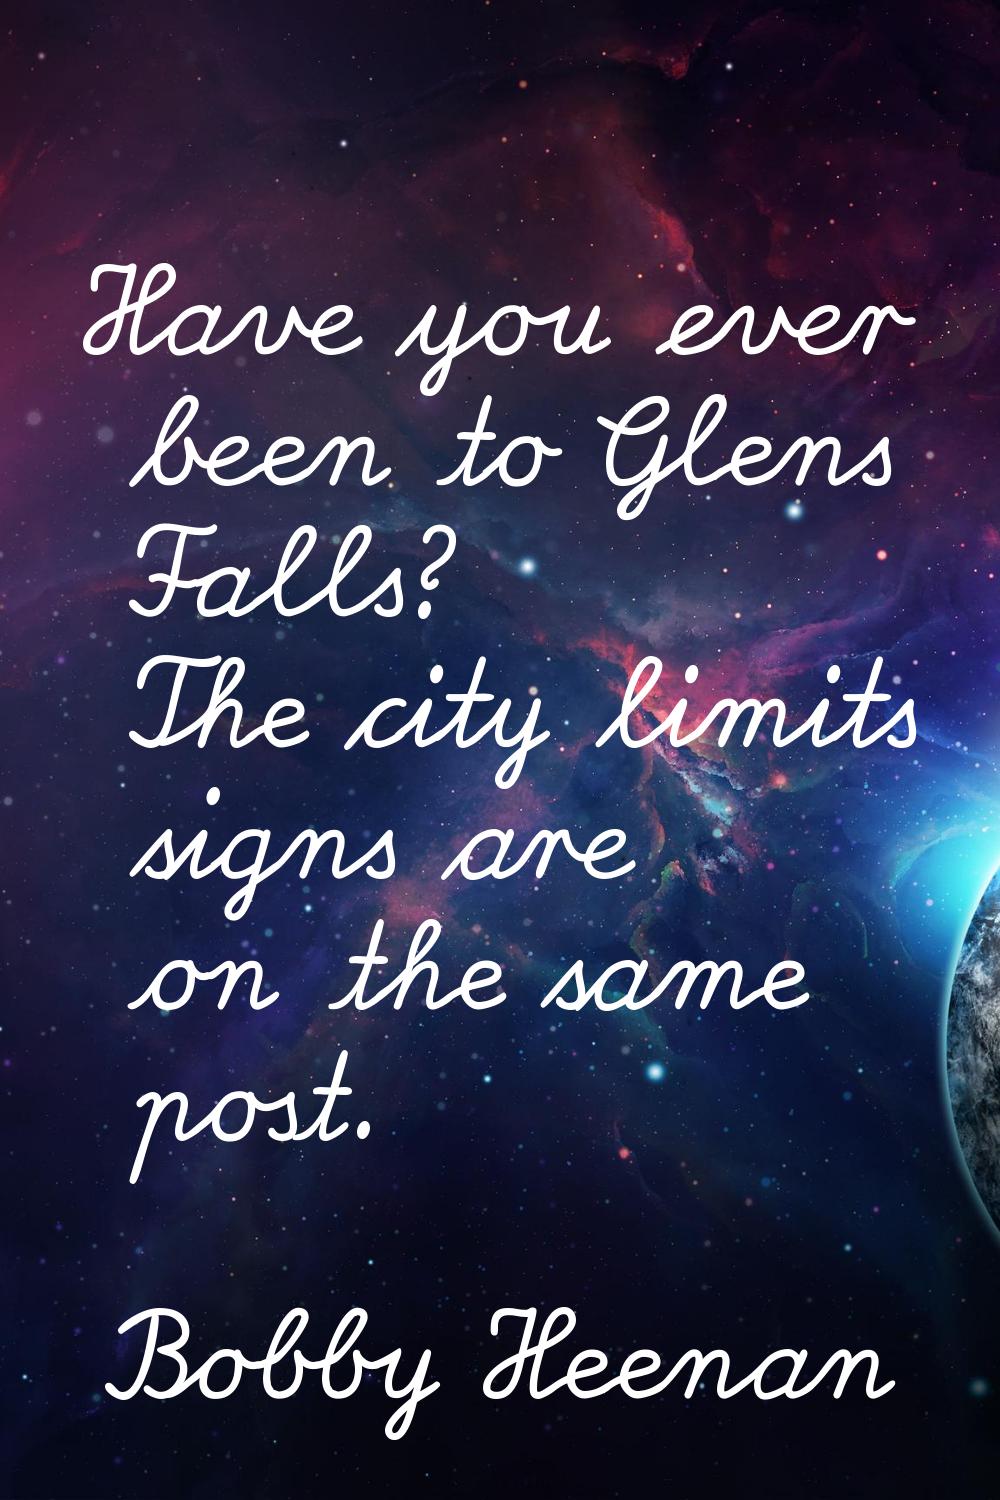 Have you ever been to Glens Falls? The city limits signs are on the same post.